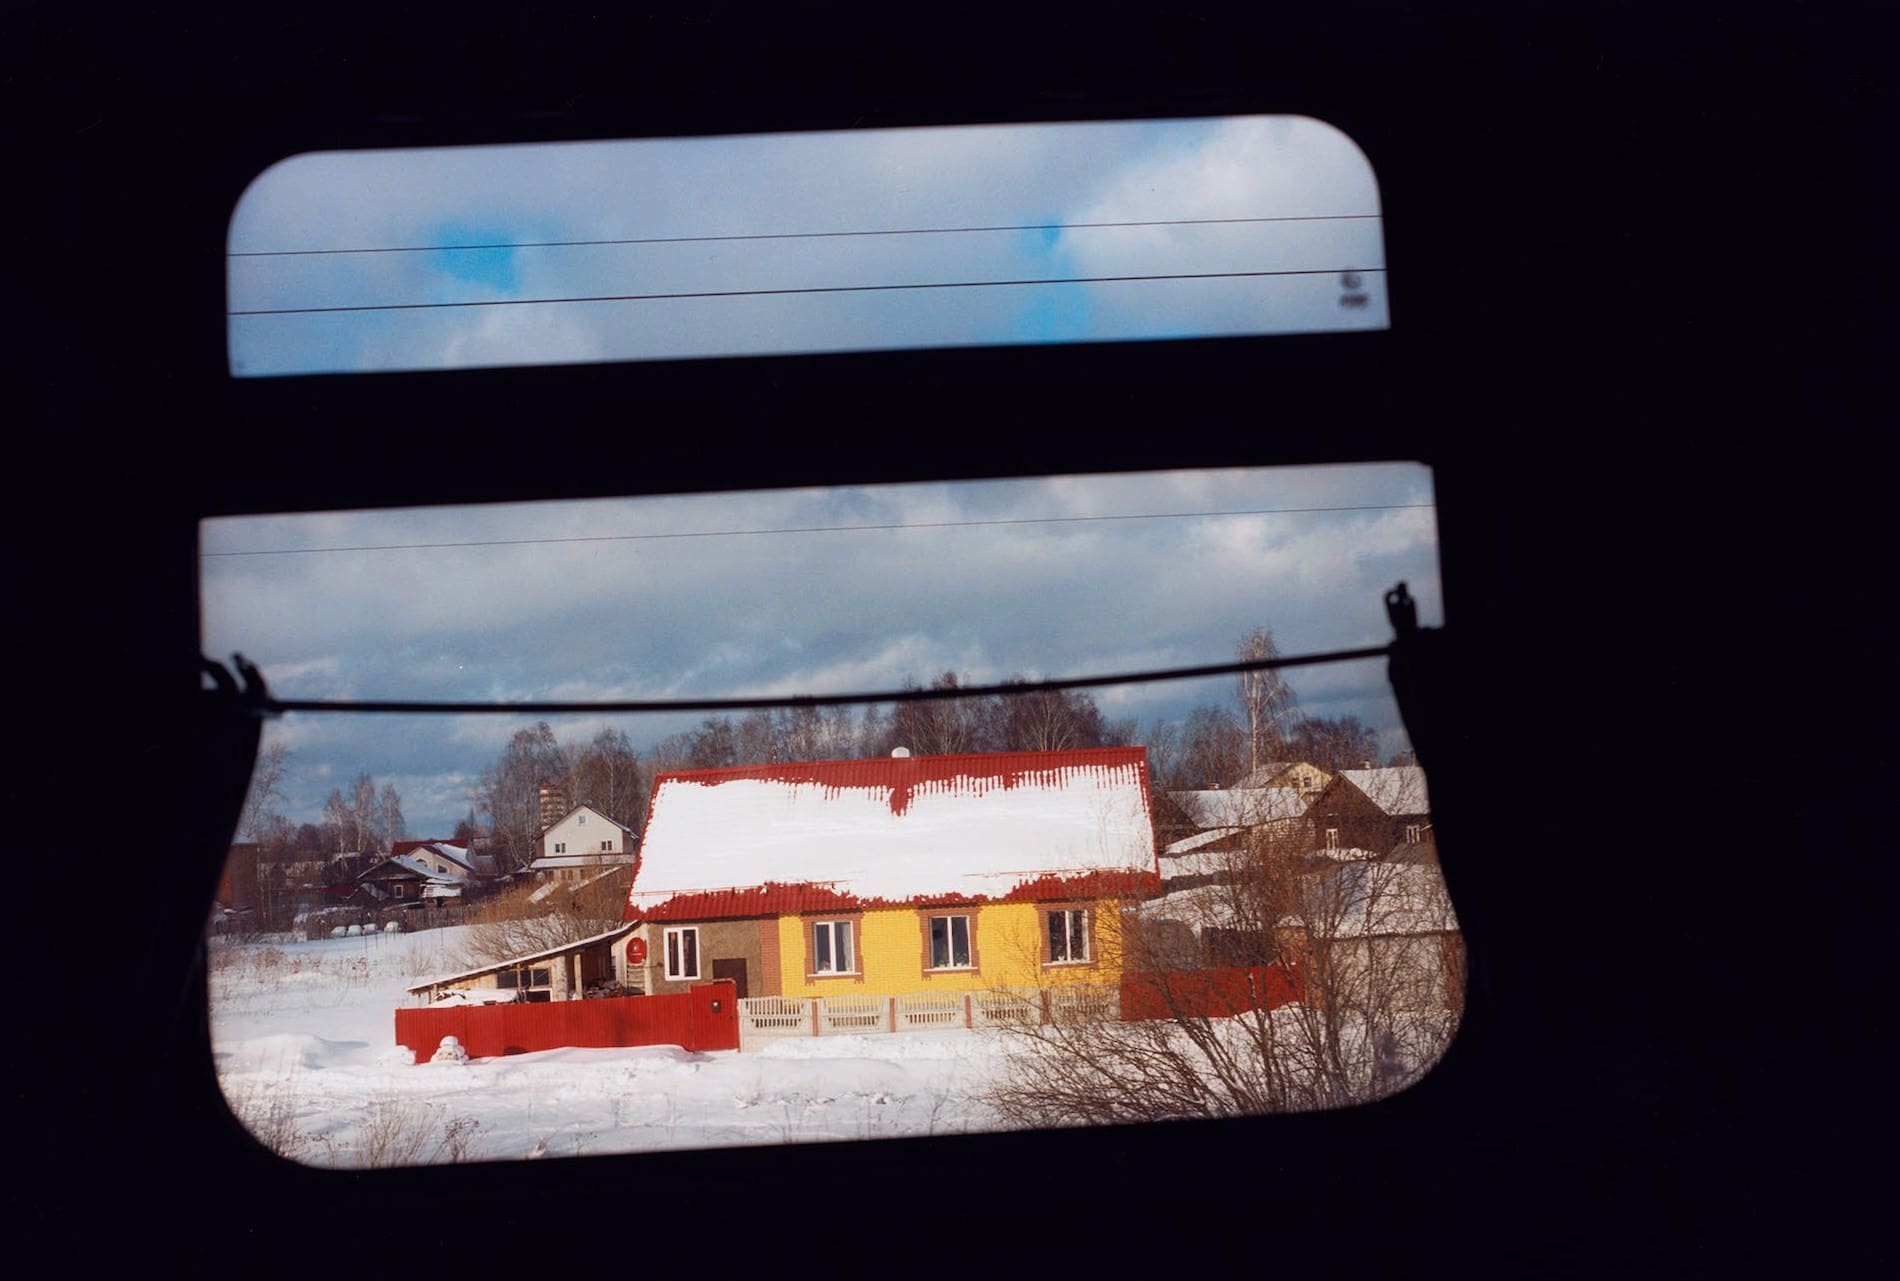 Coco Capitan, Transsiberian | A view through a train window to a yellow house with a red roof covered in snow